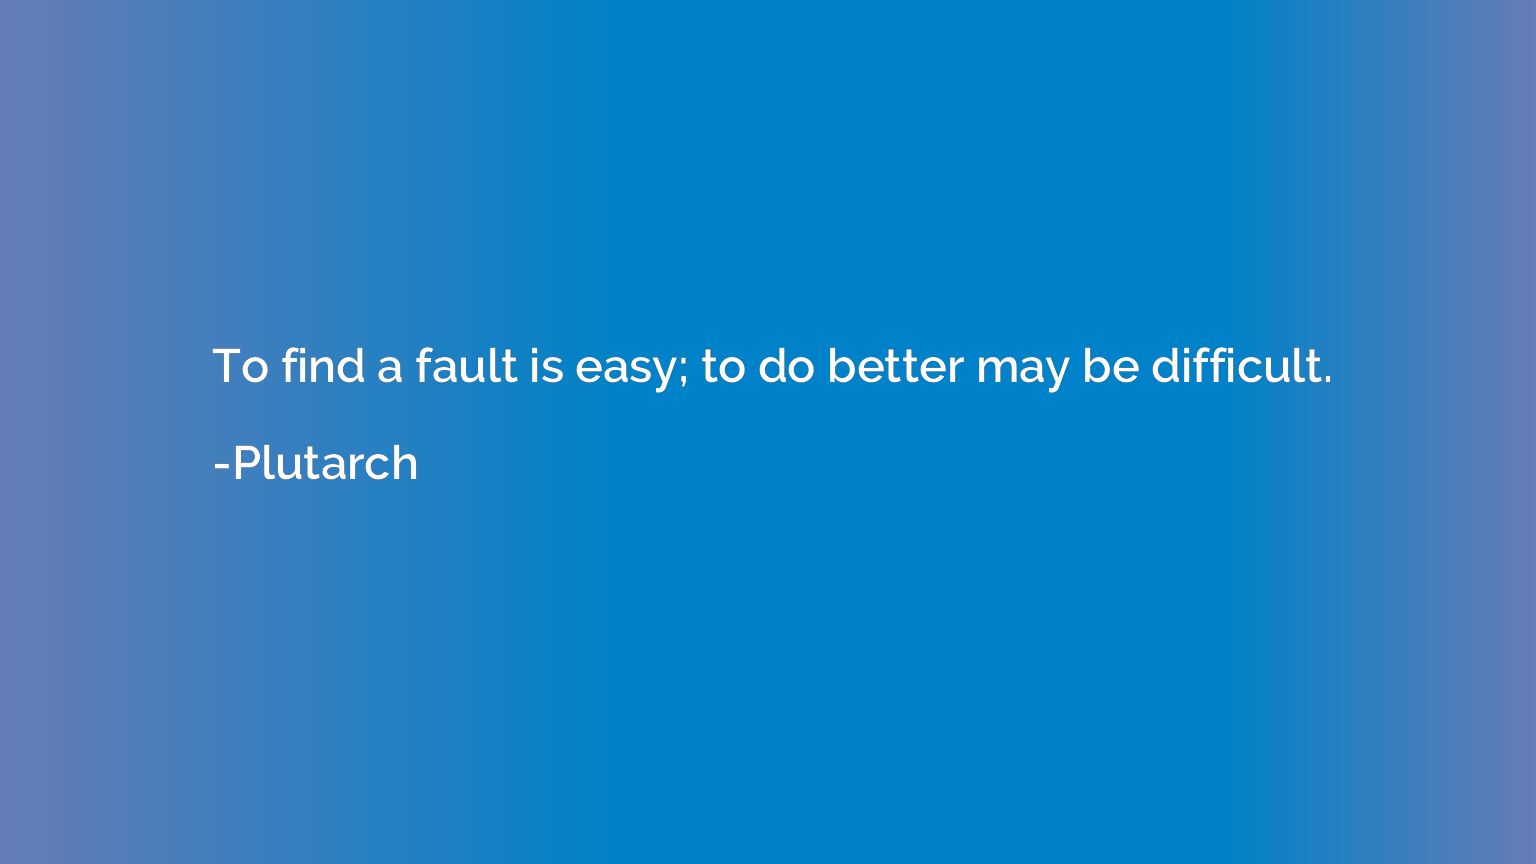 To find a fault is easy; to do better may be difficult.